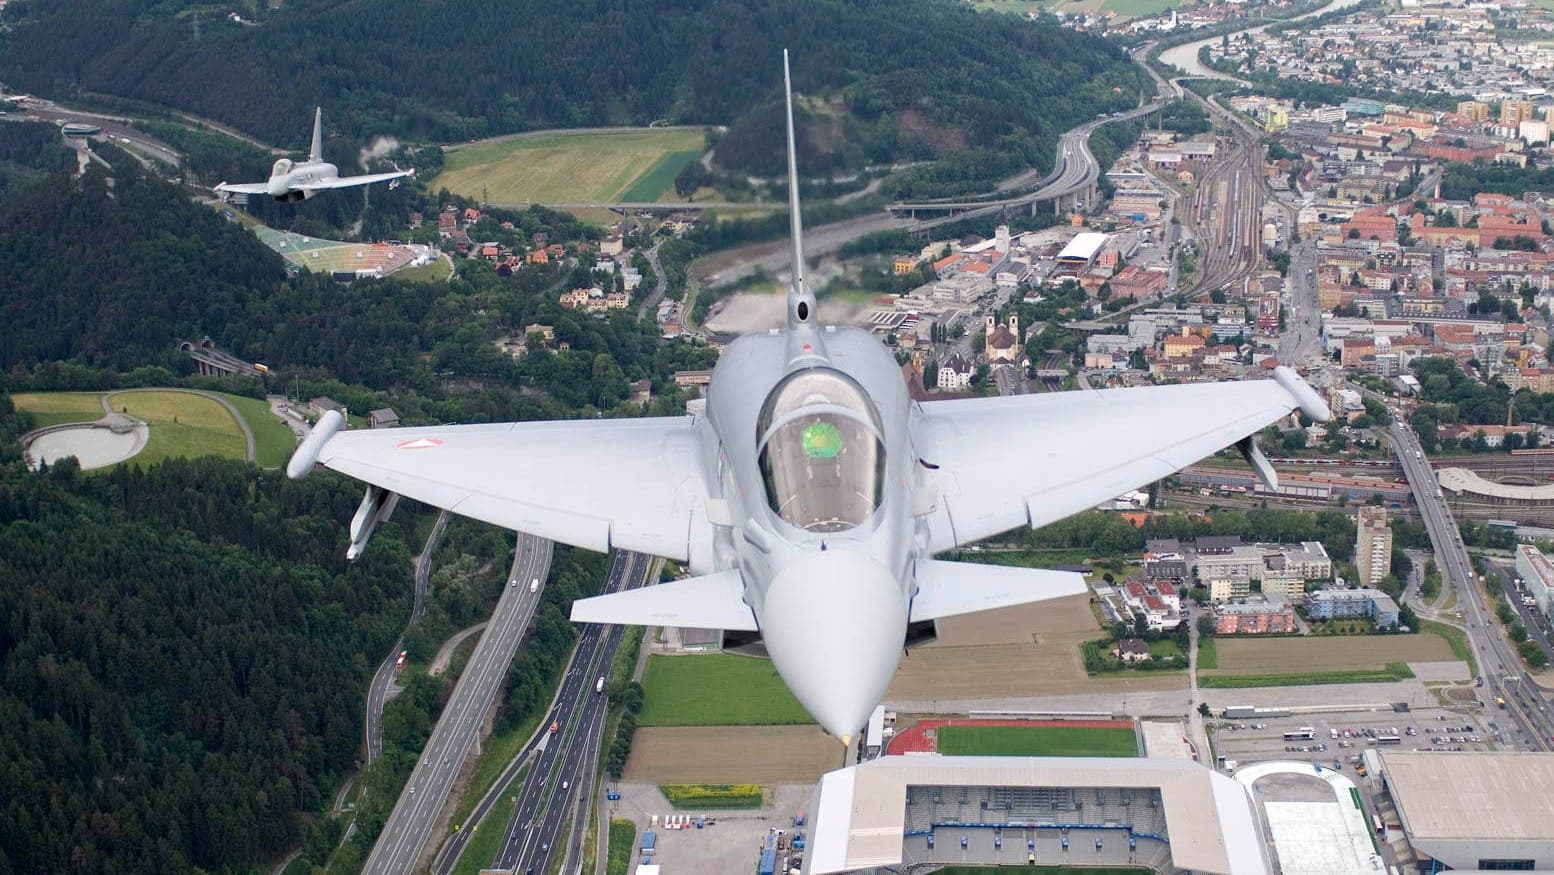 Austria Wants To Offload Its Unwanted Eurofighter Typhoons On Indonesia